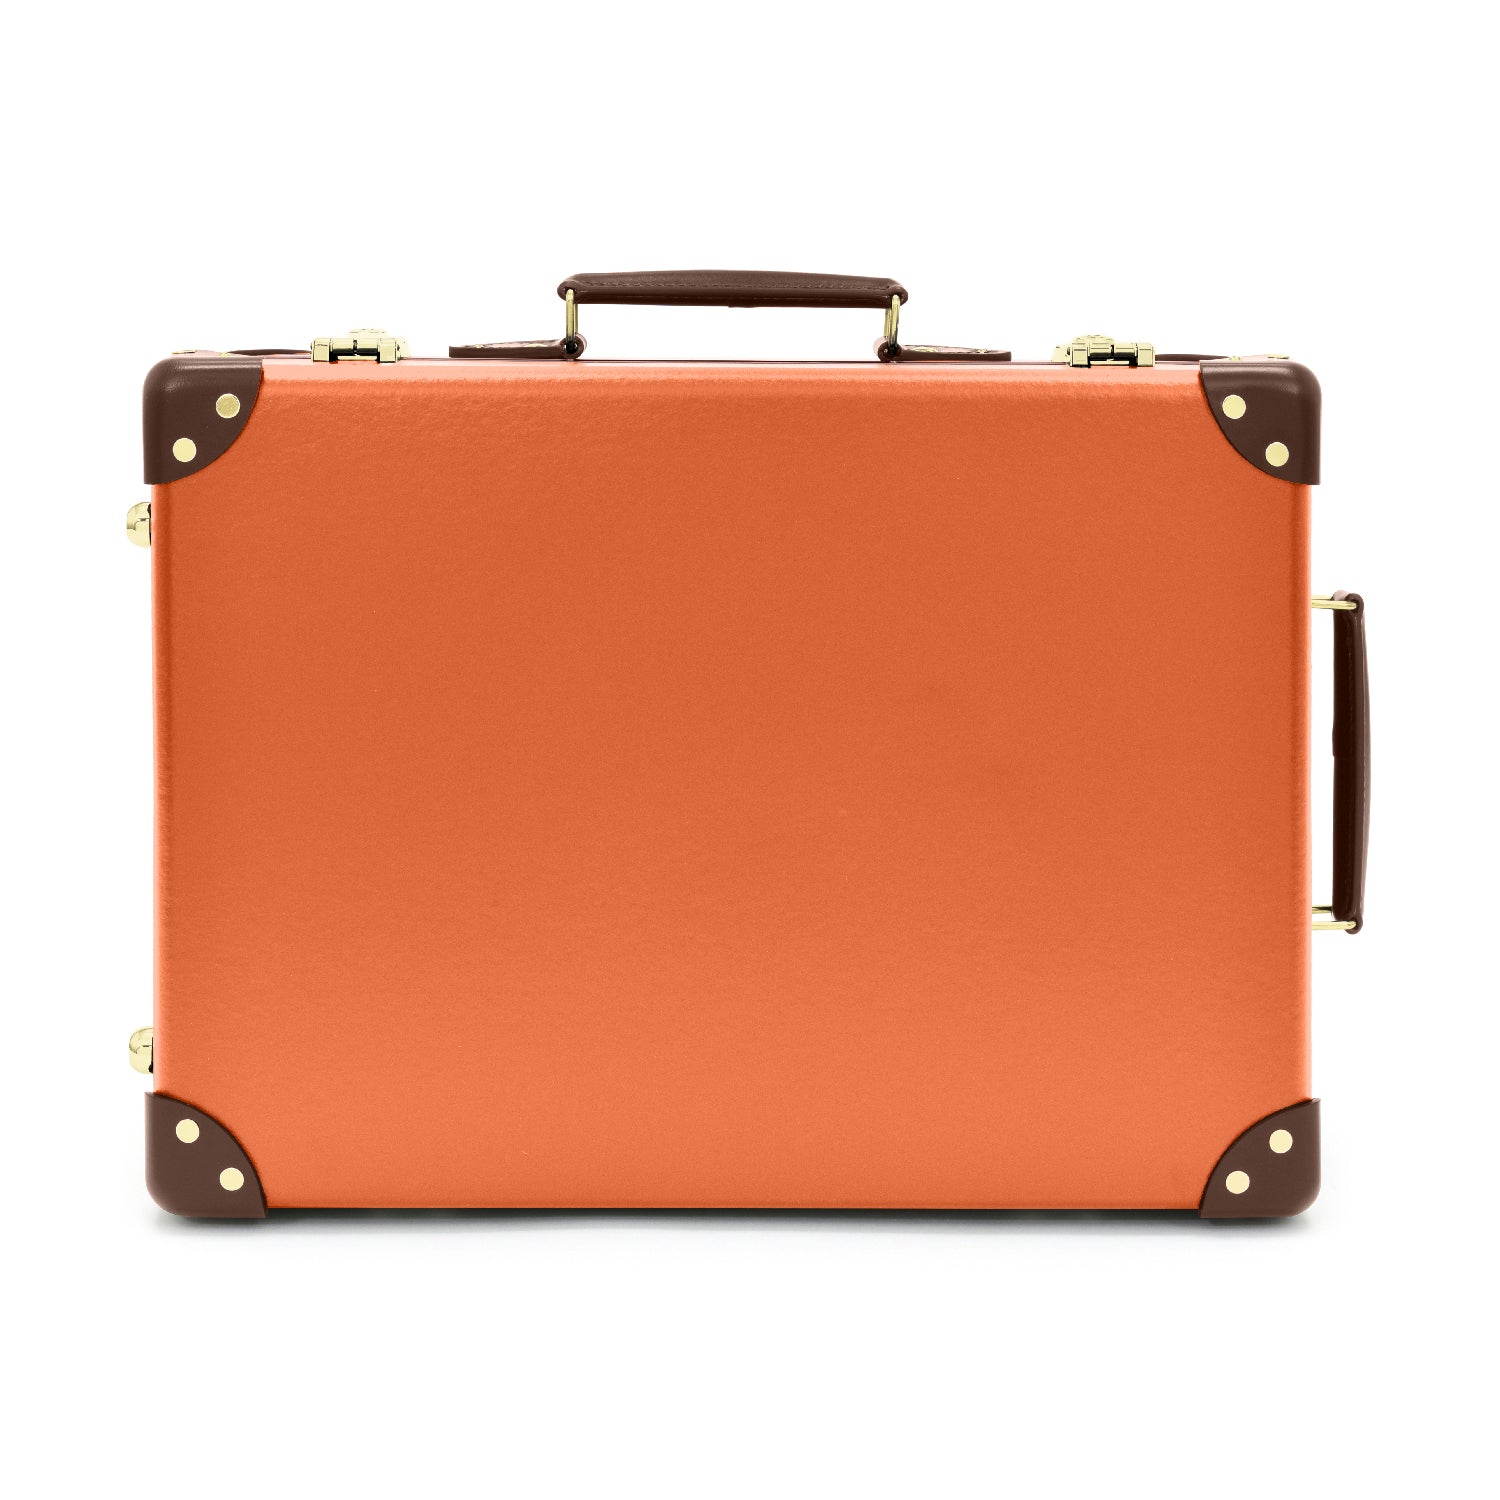 Centenary · Small Carry-On | Marmalade/Brown - GLOBE-TROTTER